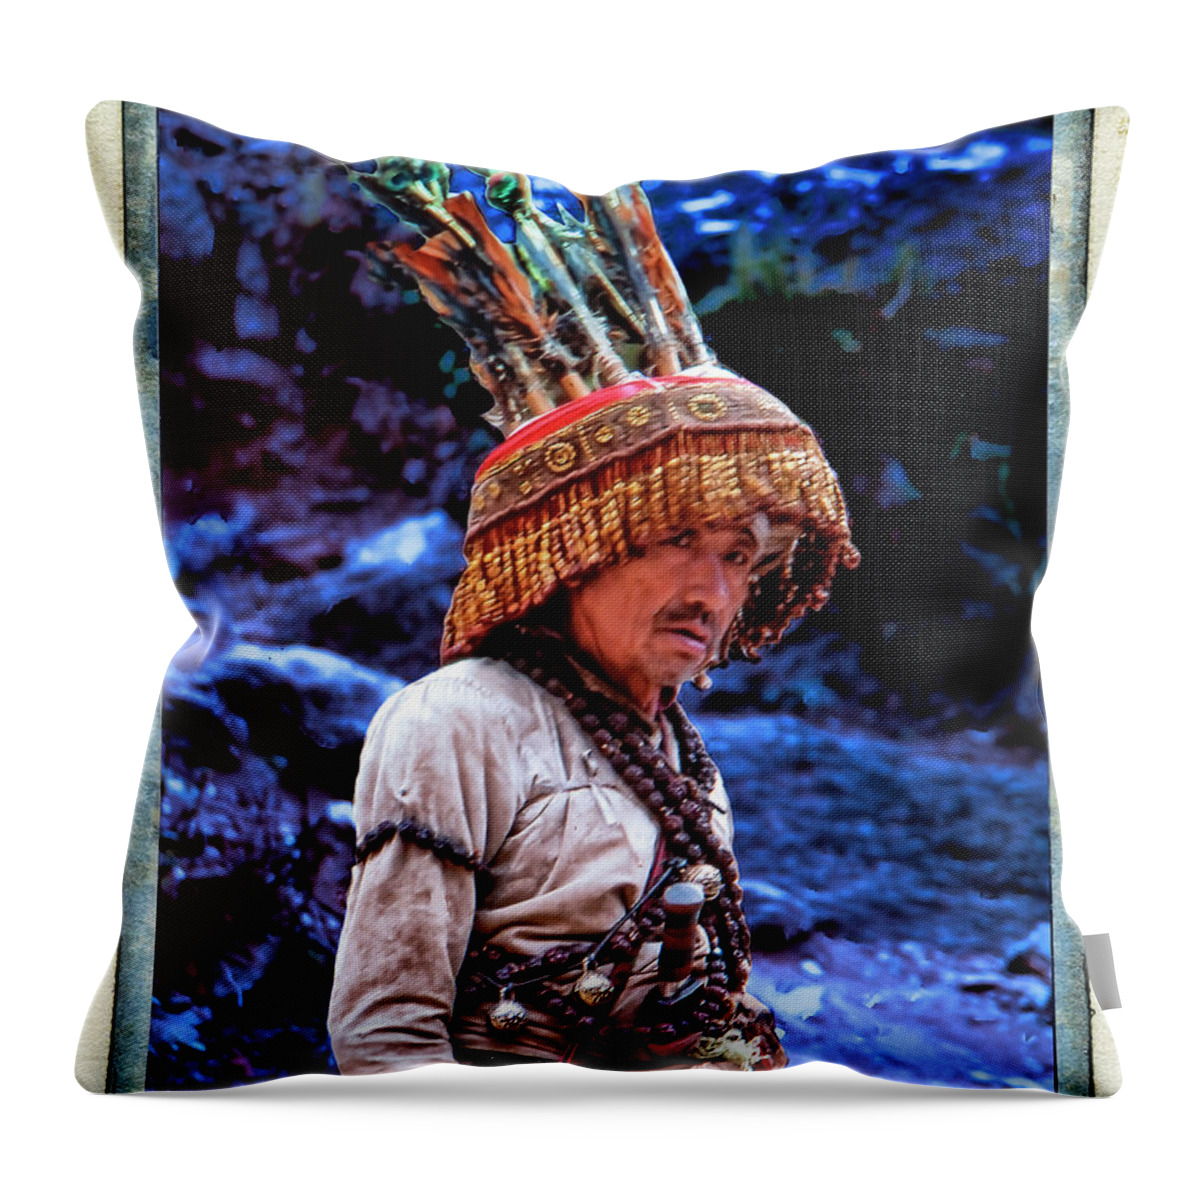 Vintage Polaroid Throw Pillow featuring the photograph Warlock by Dominic Piperata